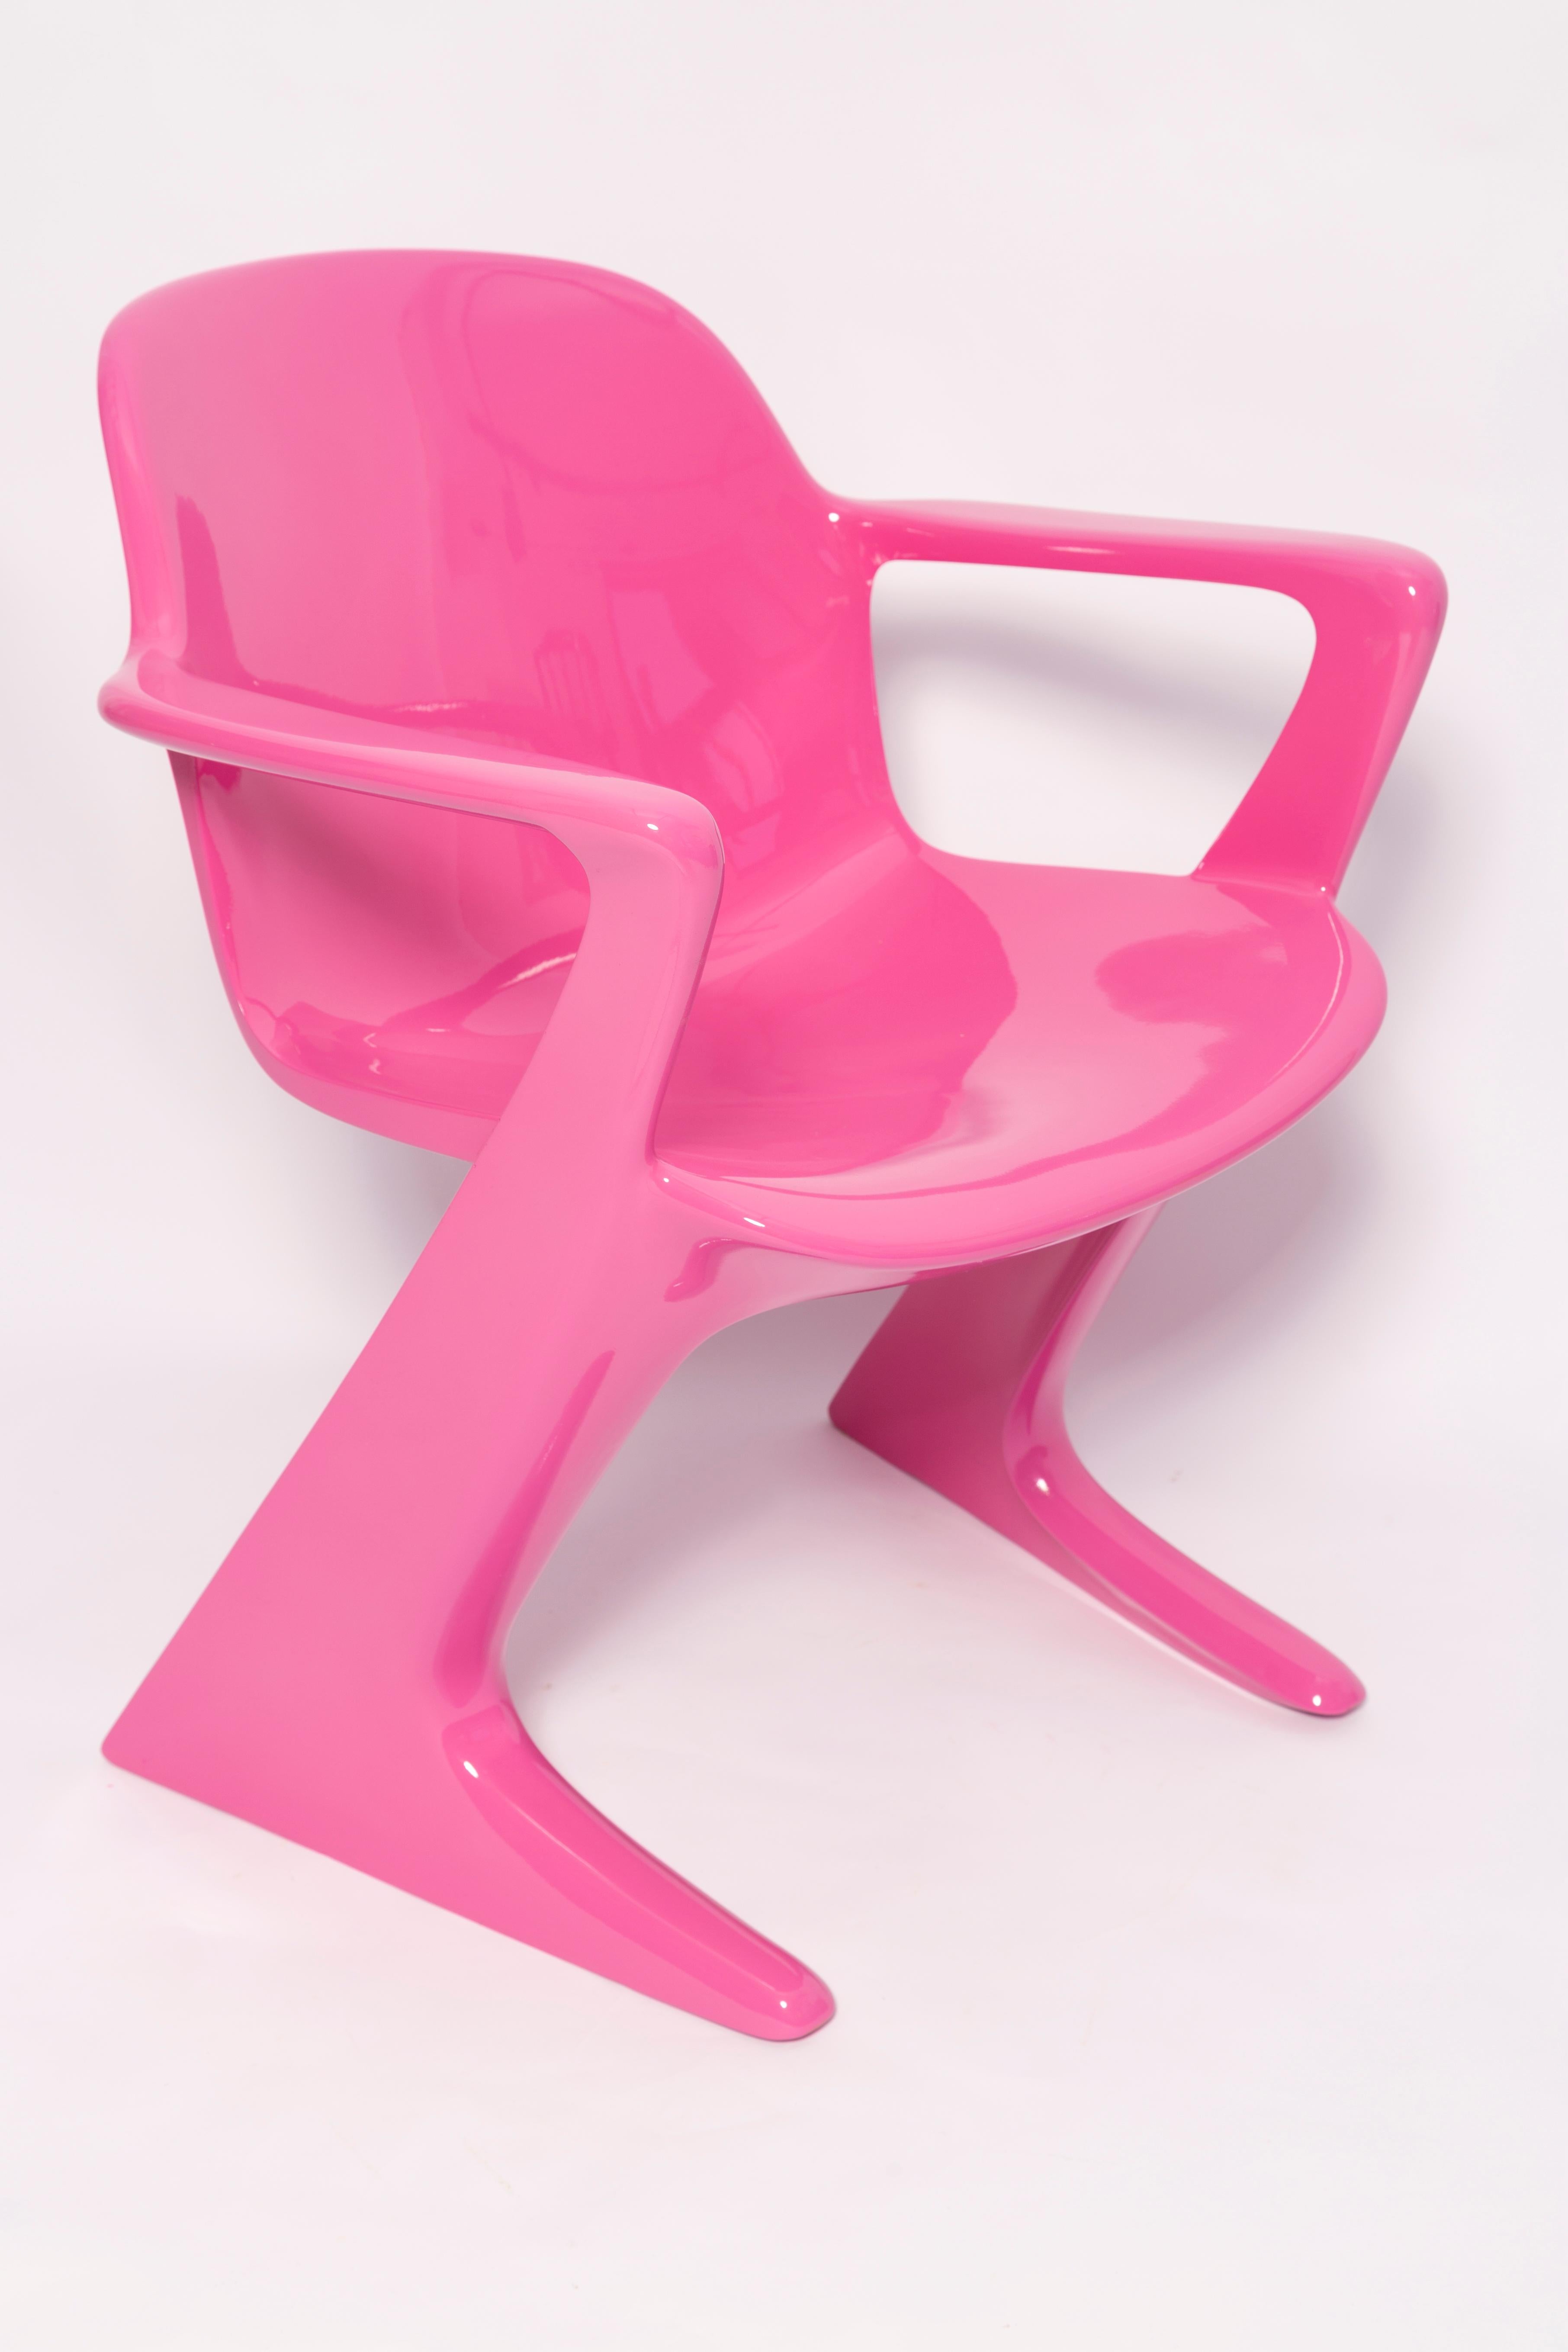 Mid-Century Modern Set of Four Mid Century Pink Kangaroo Chairs, Ernst Moeckl, Germany, 1960s For Sale